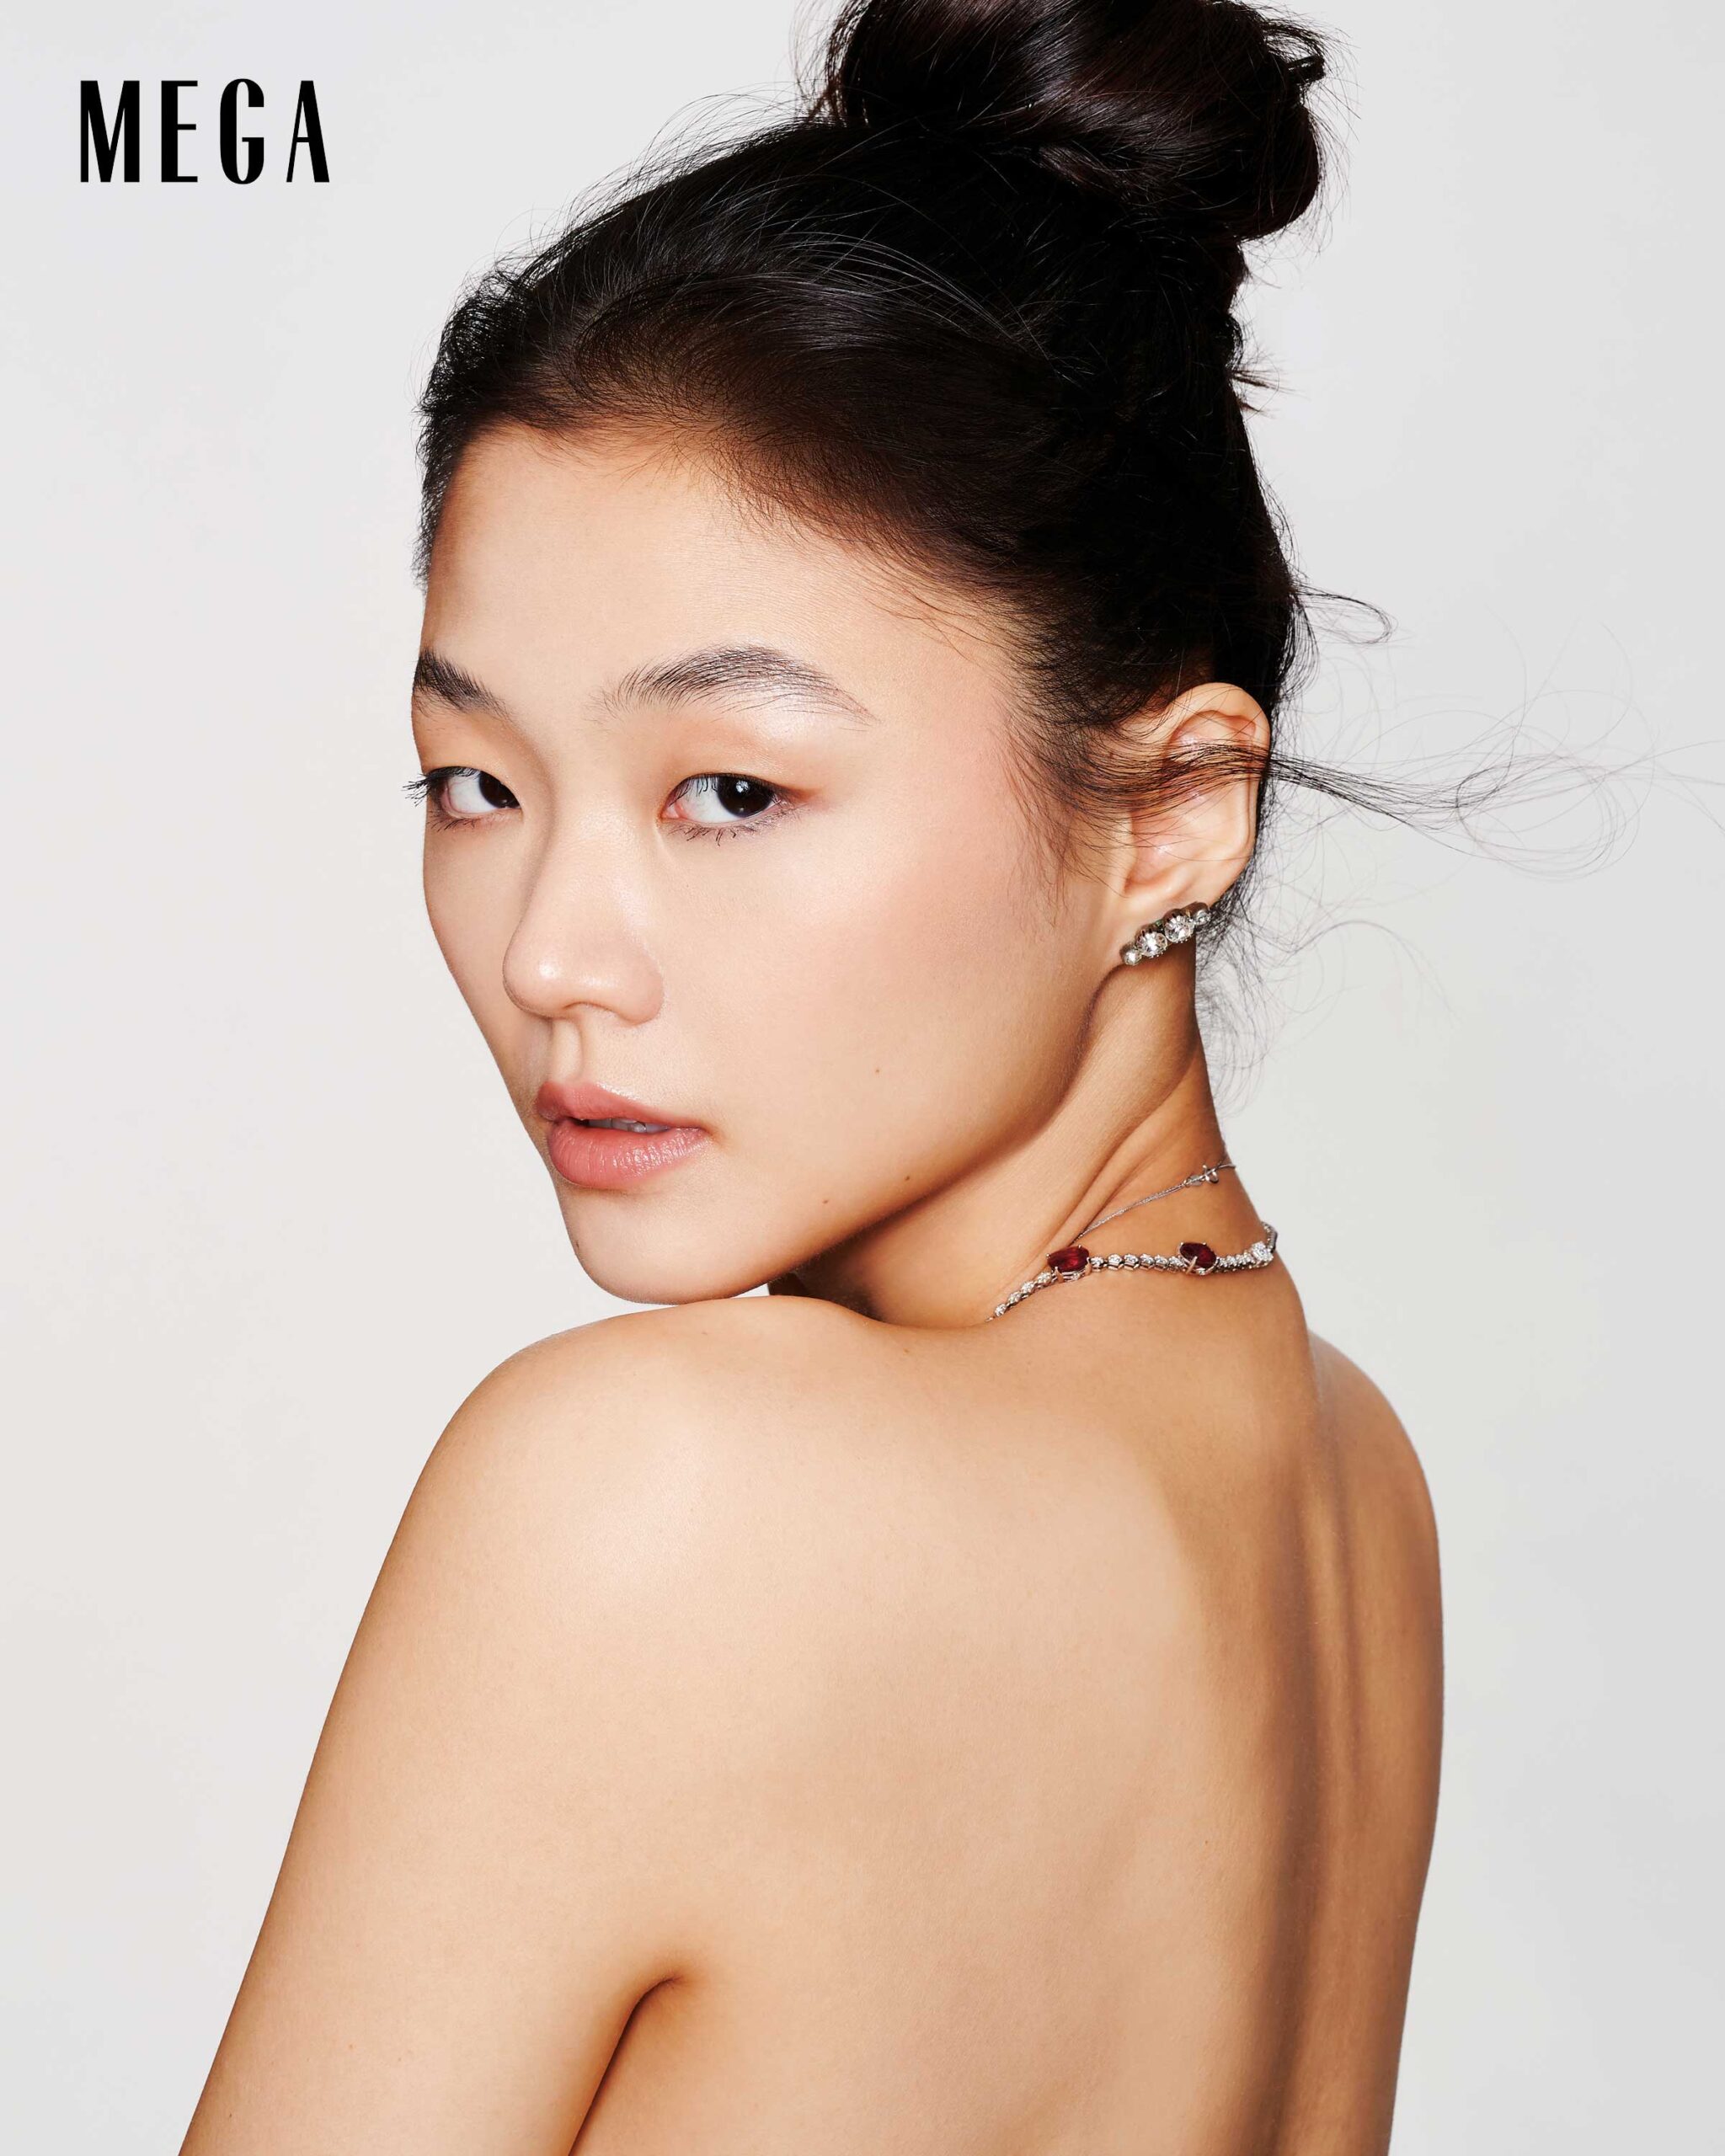 Selina Woo Bhang is wearing a necklace by LVNA BY DRAKE DUSTIN